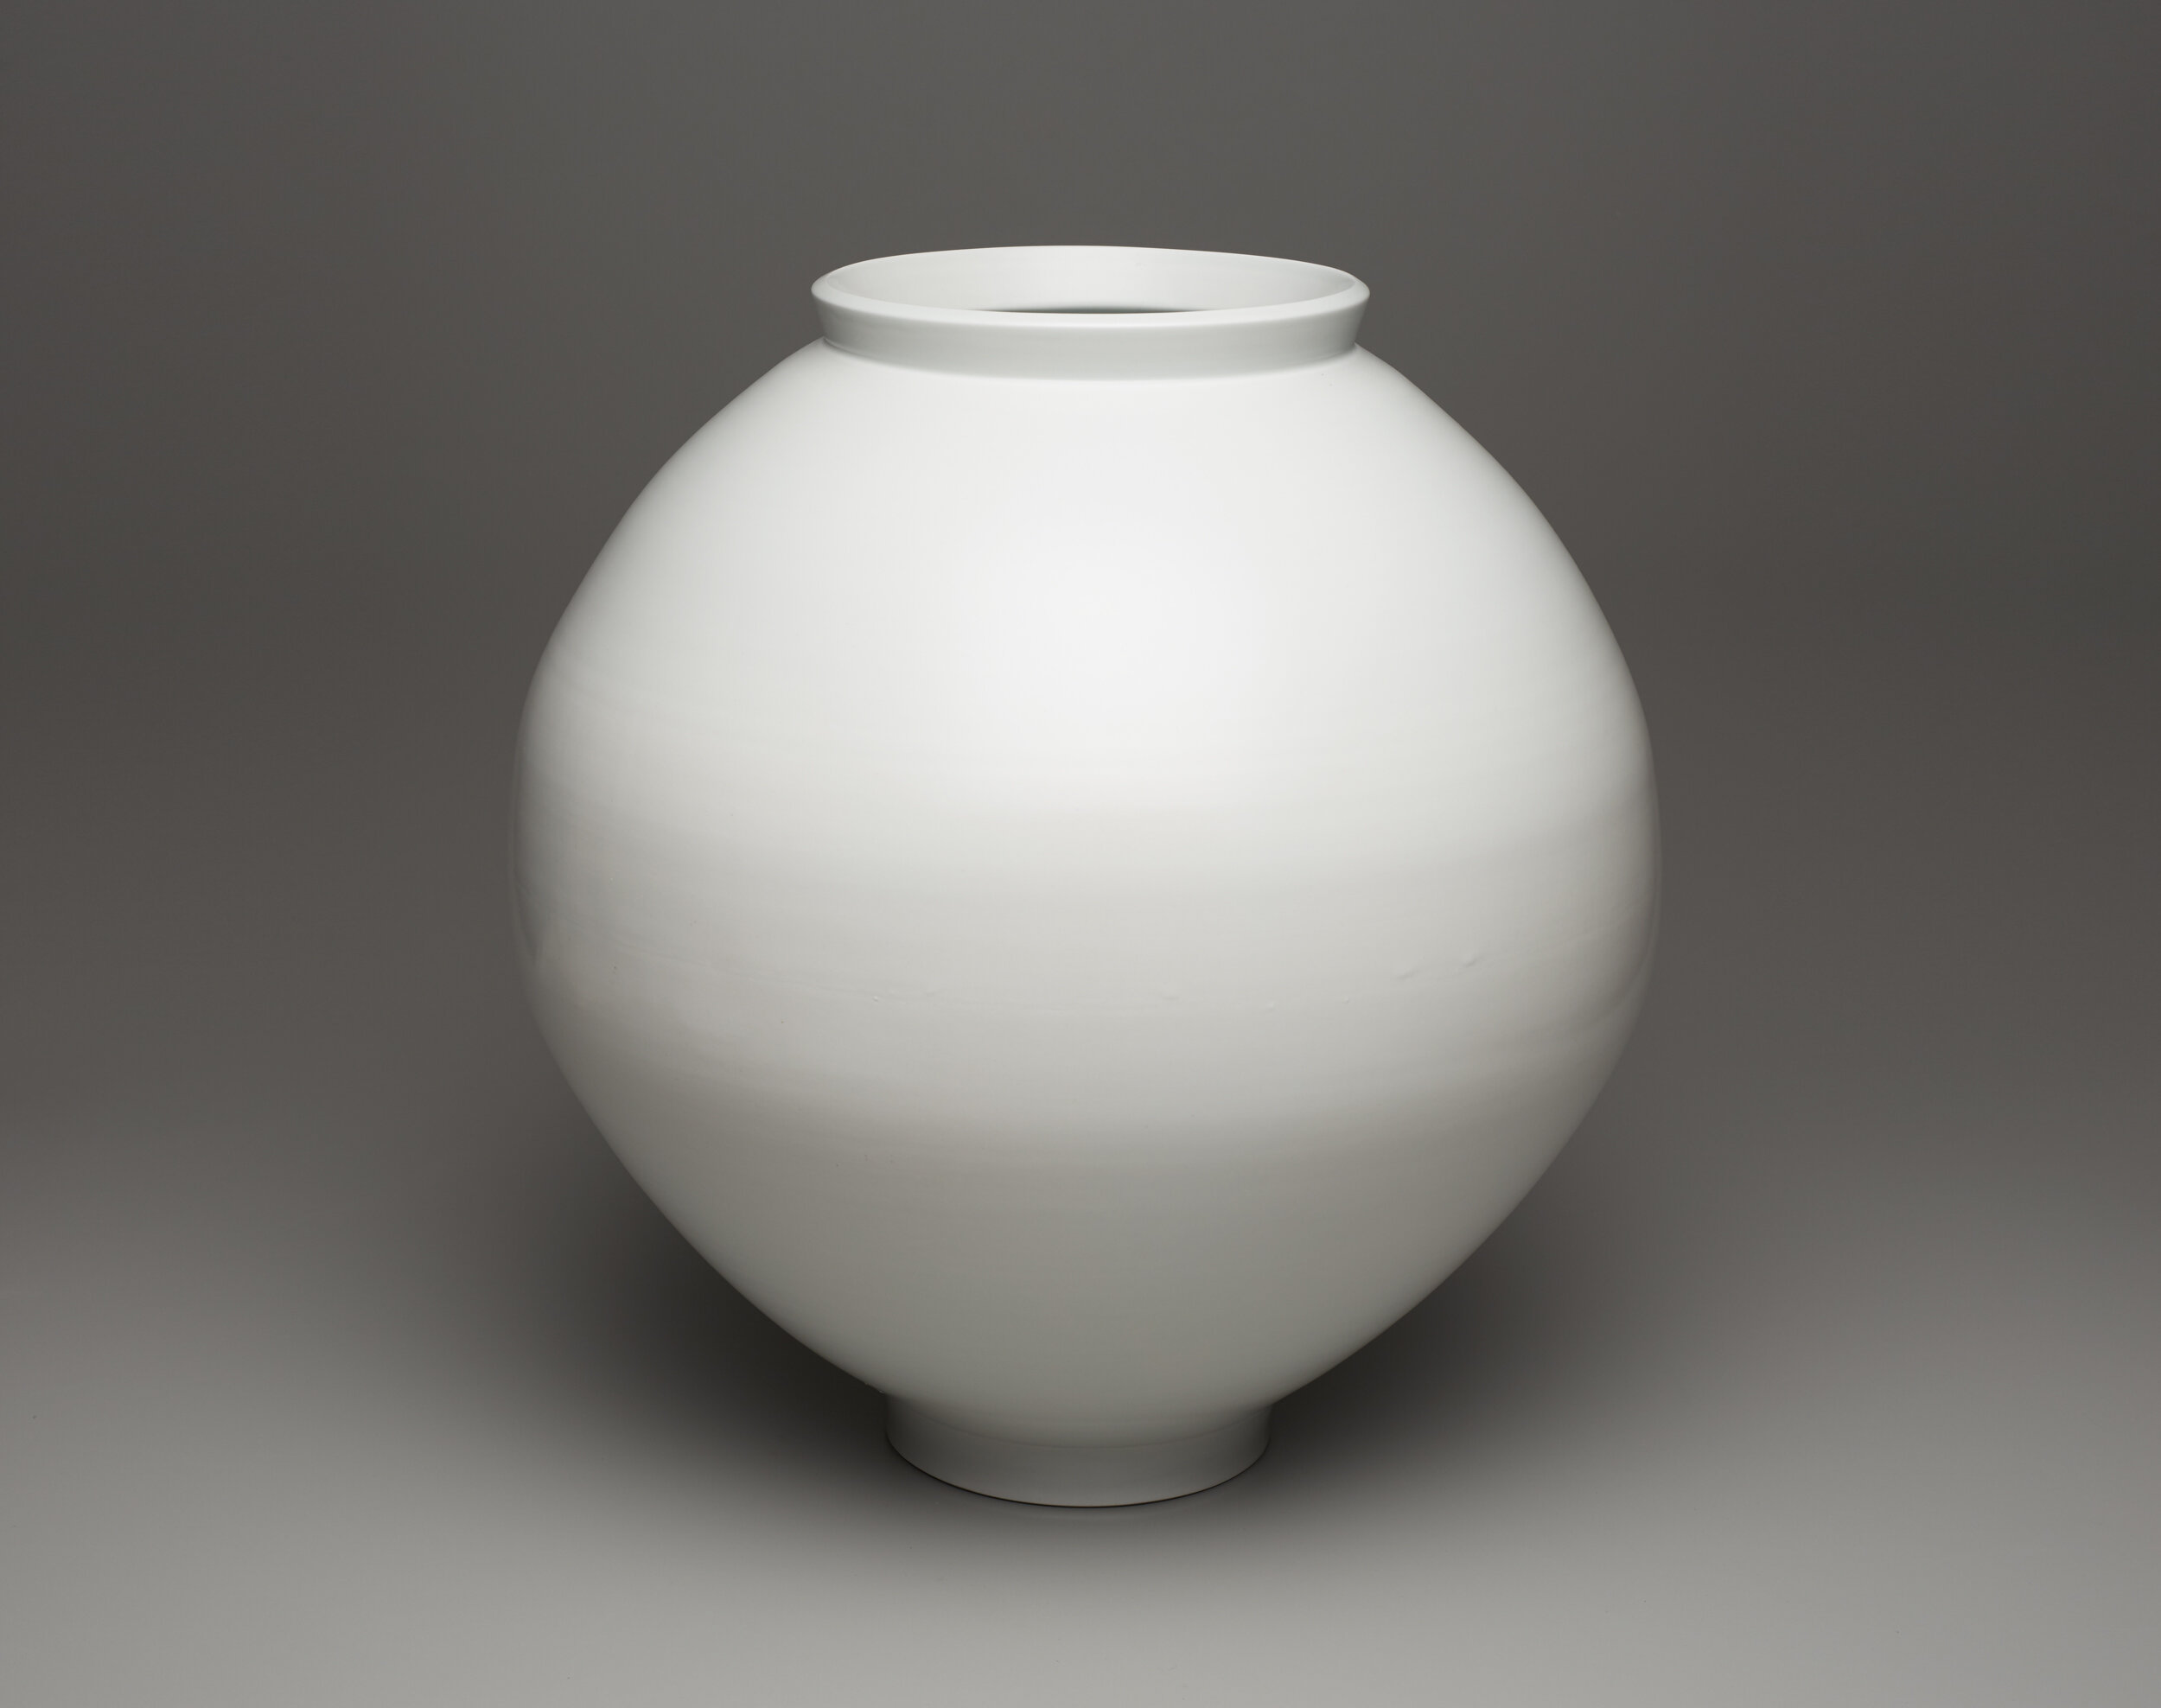  Kim Yikyung, Moon Jar, 2017, porcelain, Museum Purchase: Funds provided by Asian Art Auction Proceeds, © unknown, research required, 2017.53.1 